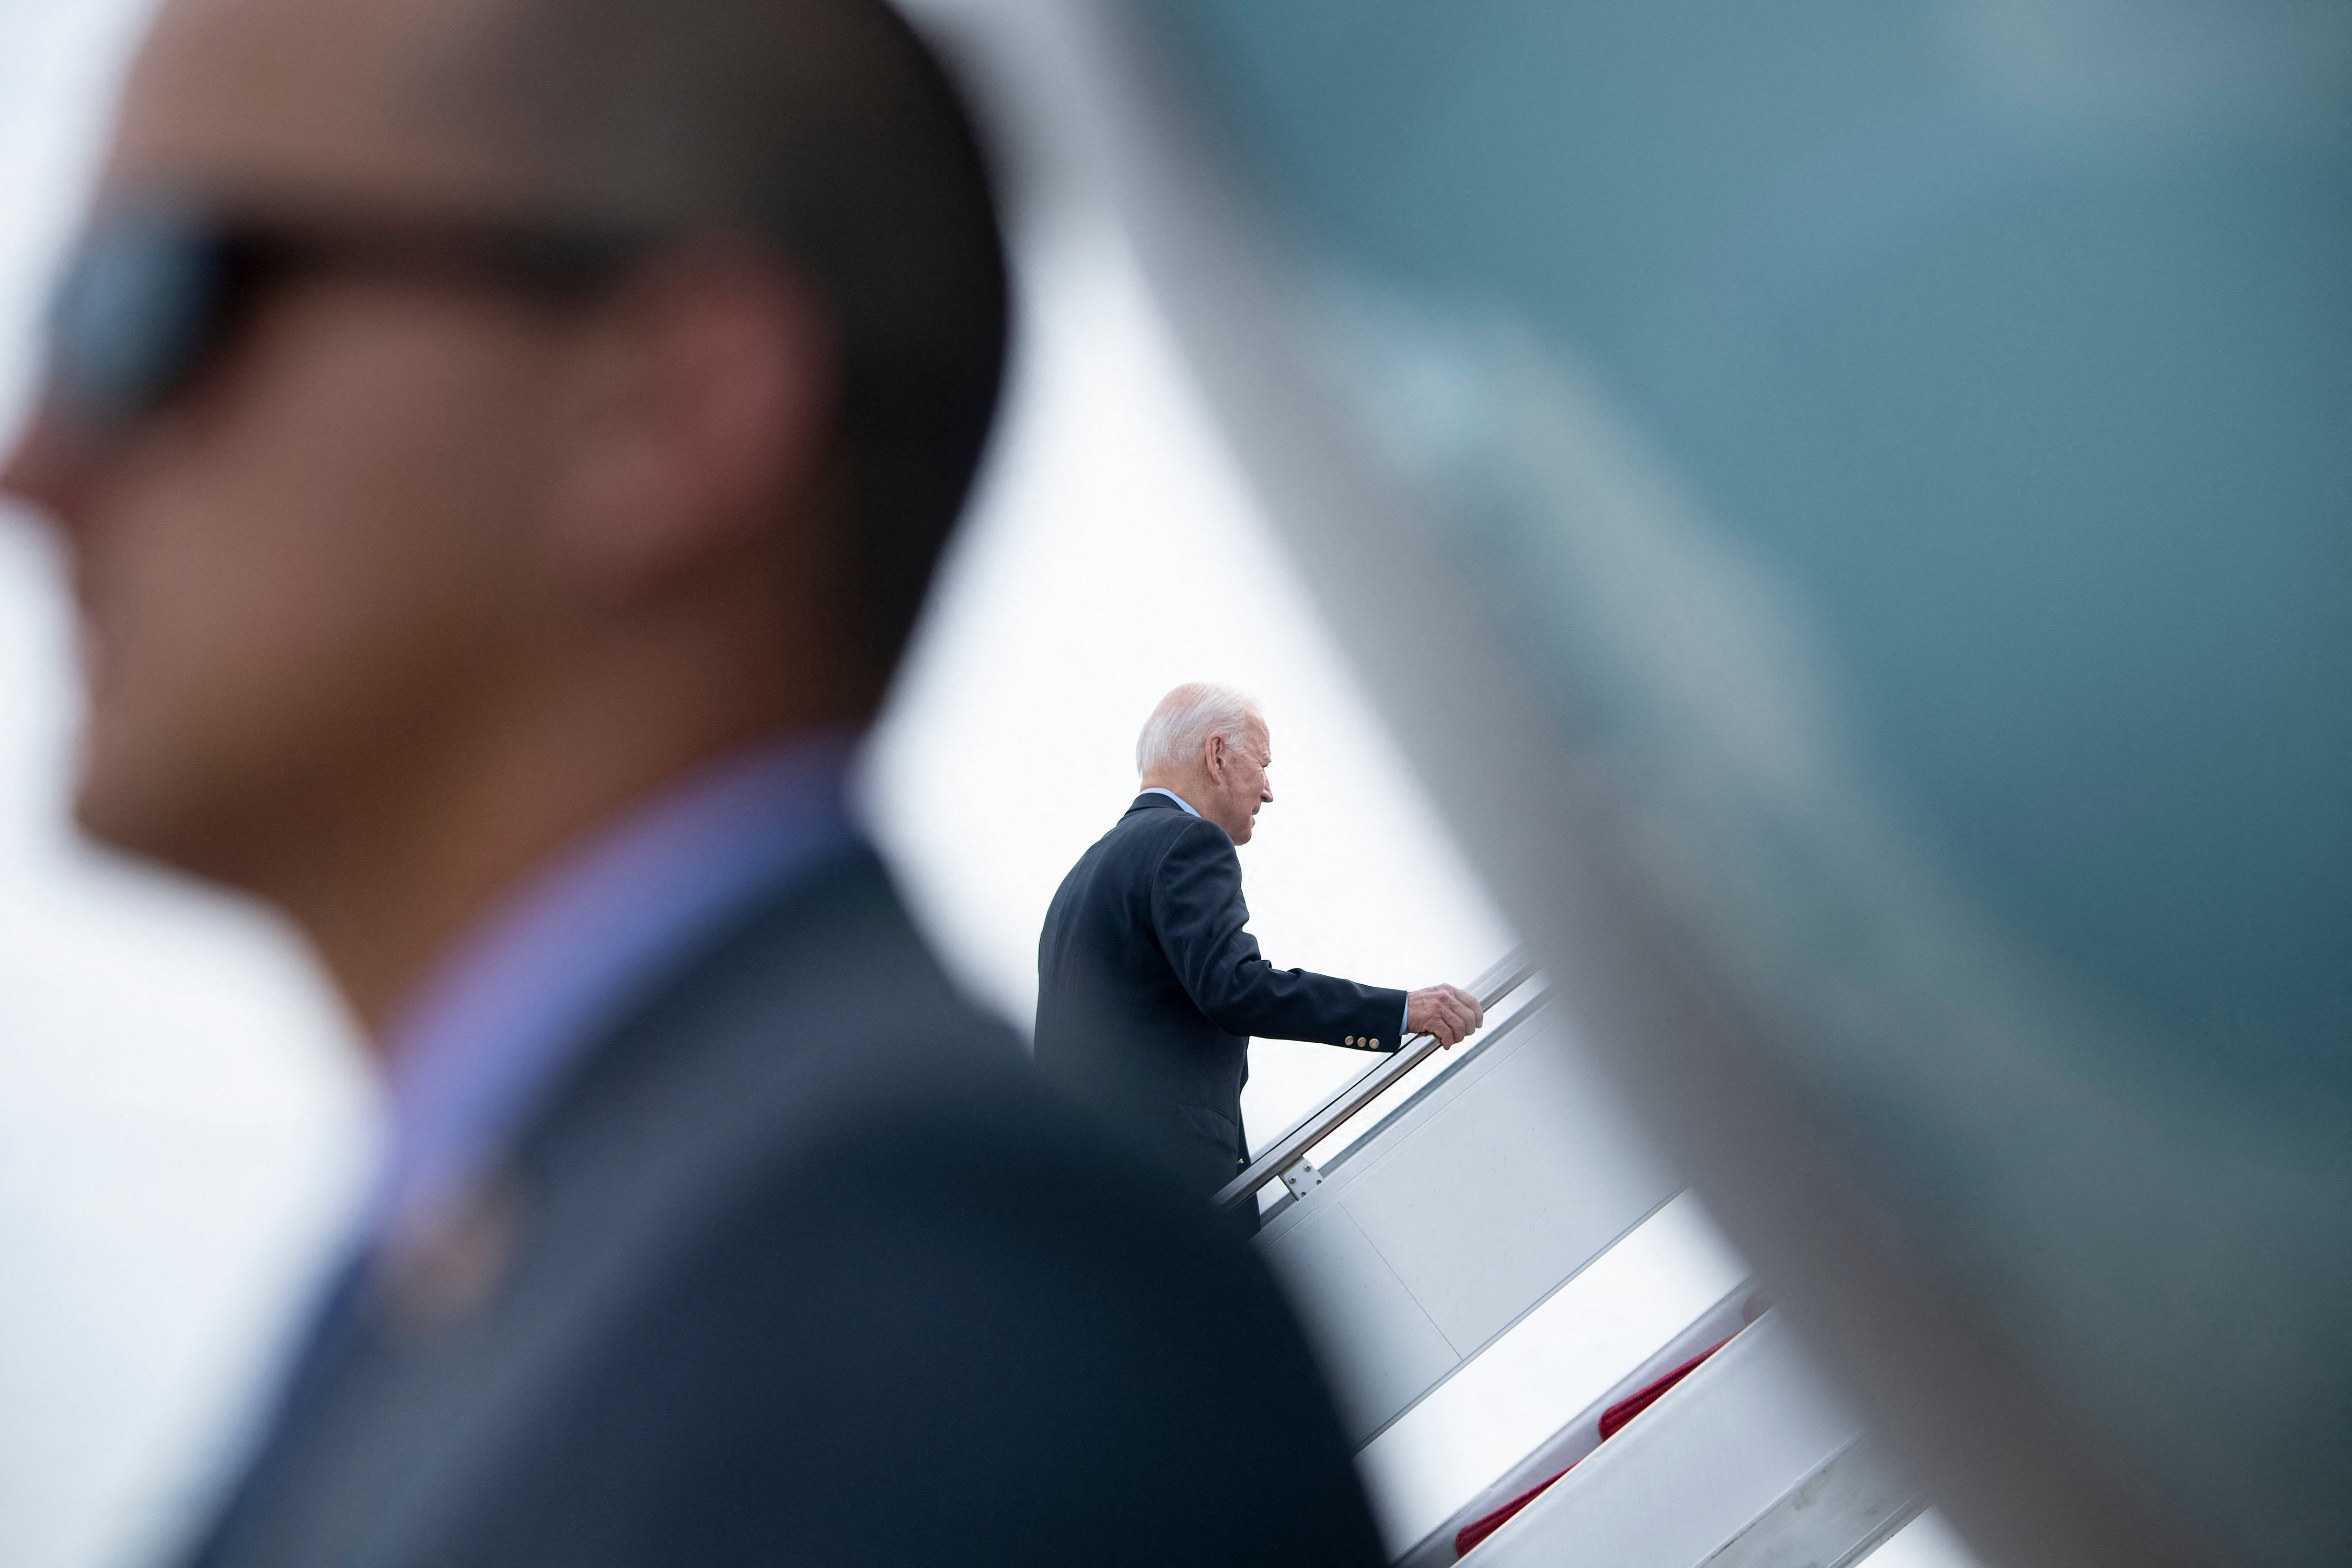 US President Joe Biden boards Air Force One at Andrews Air Force Base before departing for the UK and Europe to attend a series of summits